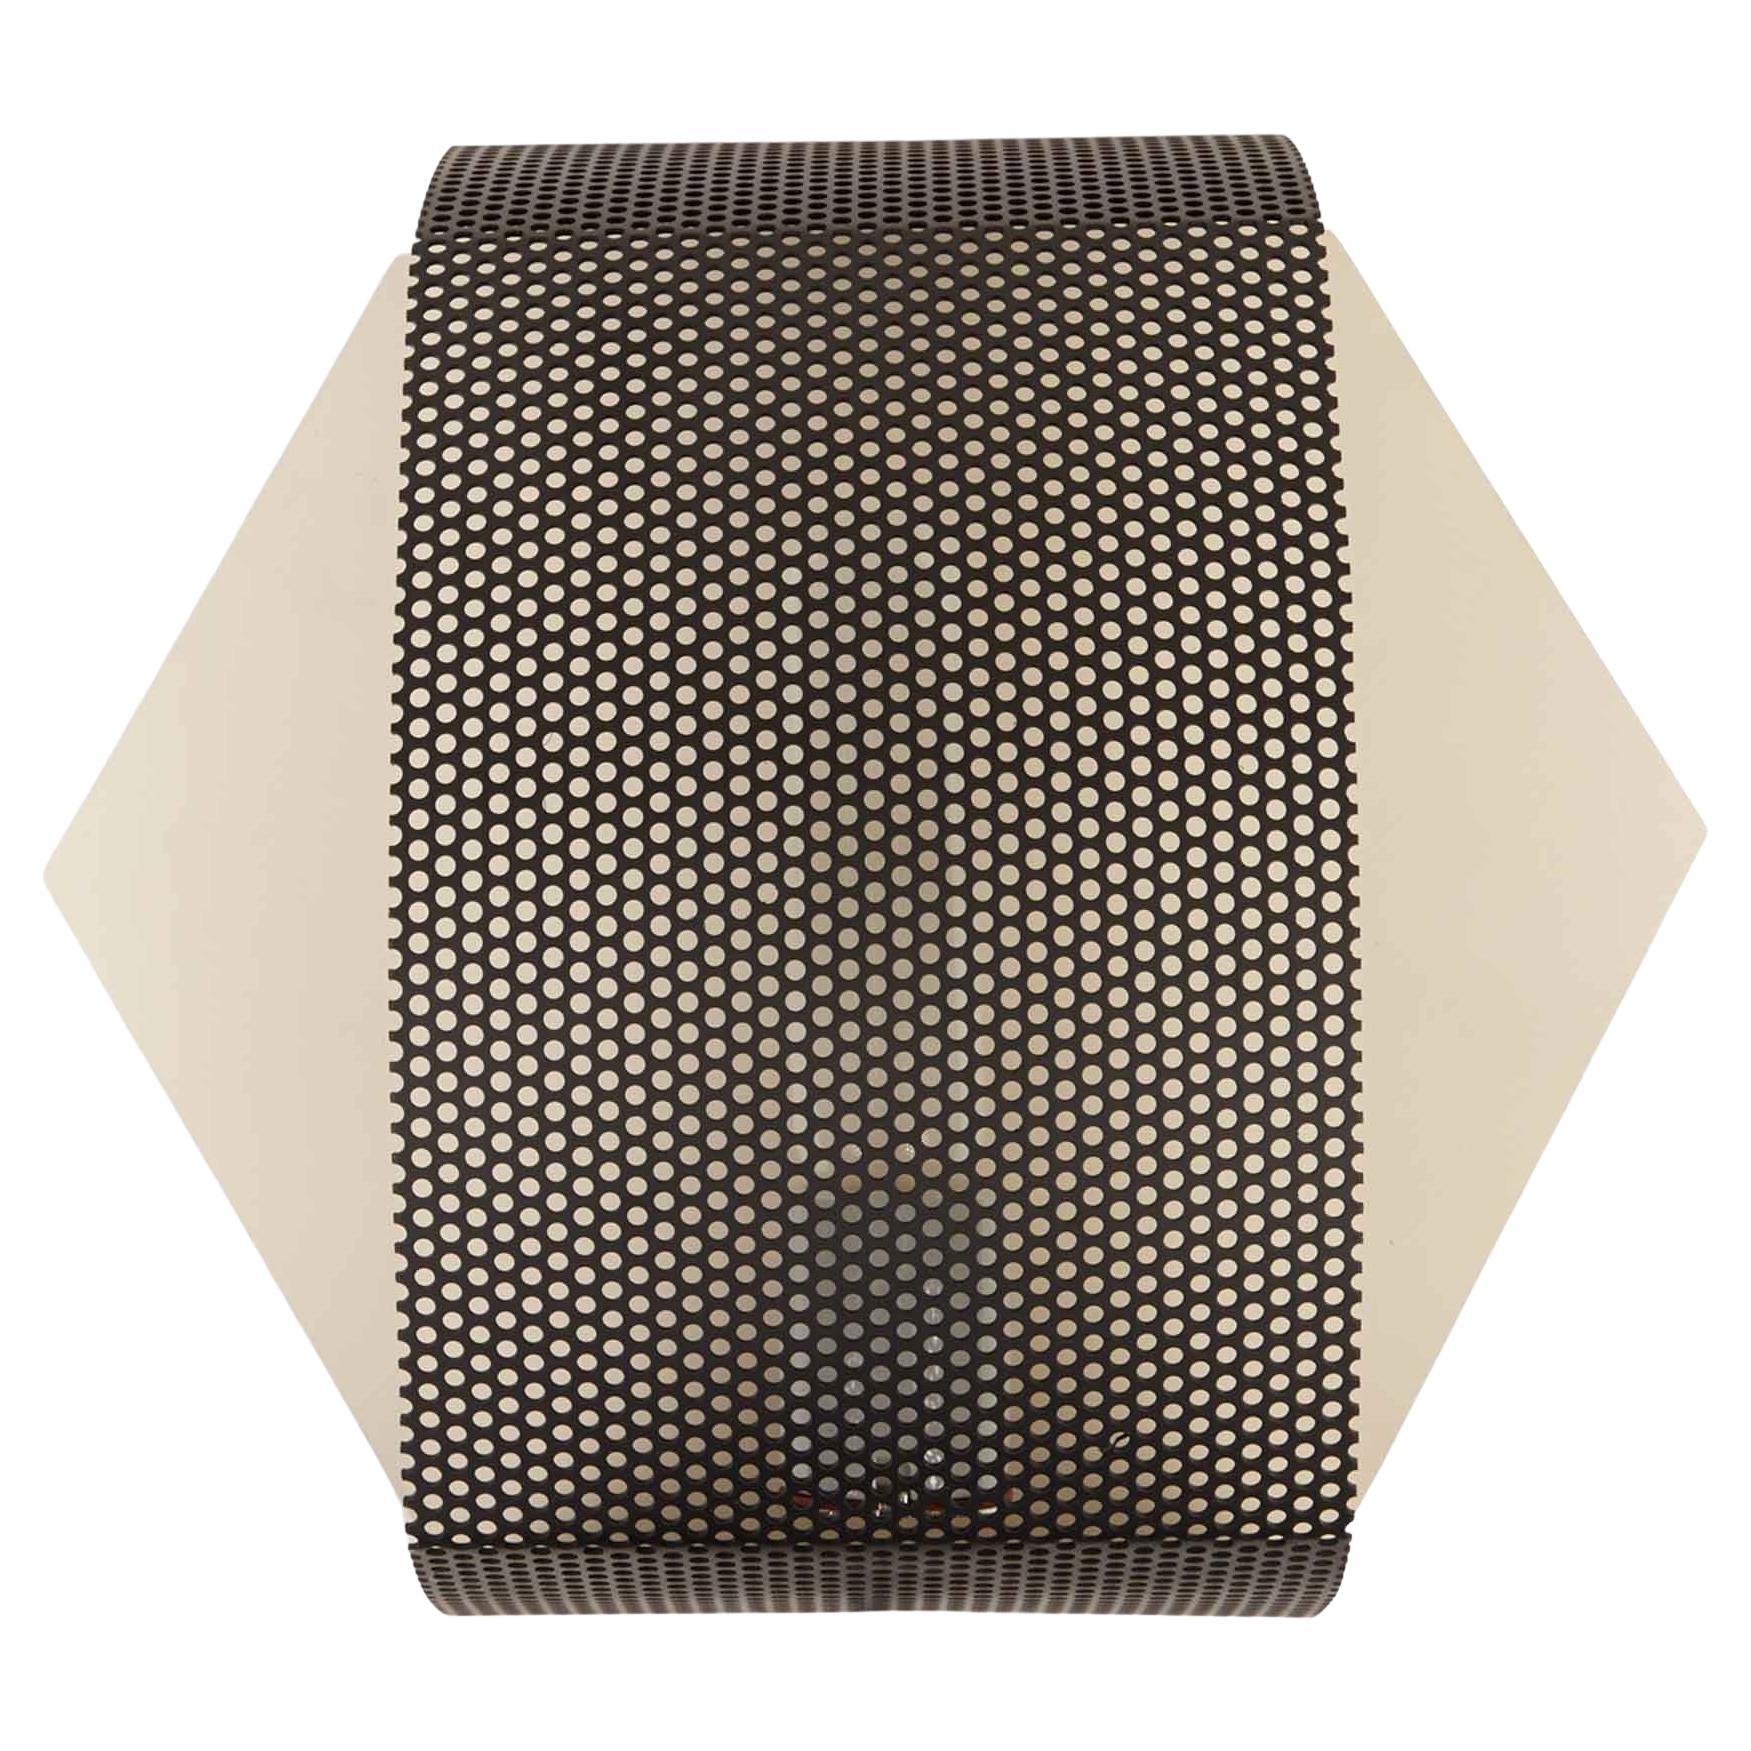 Hexagon Perforated Sconce by Lawson-Fenning For Sale